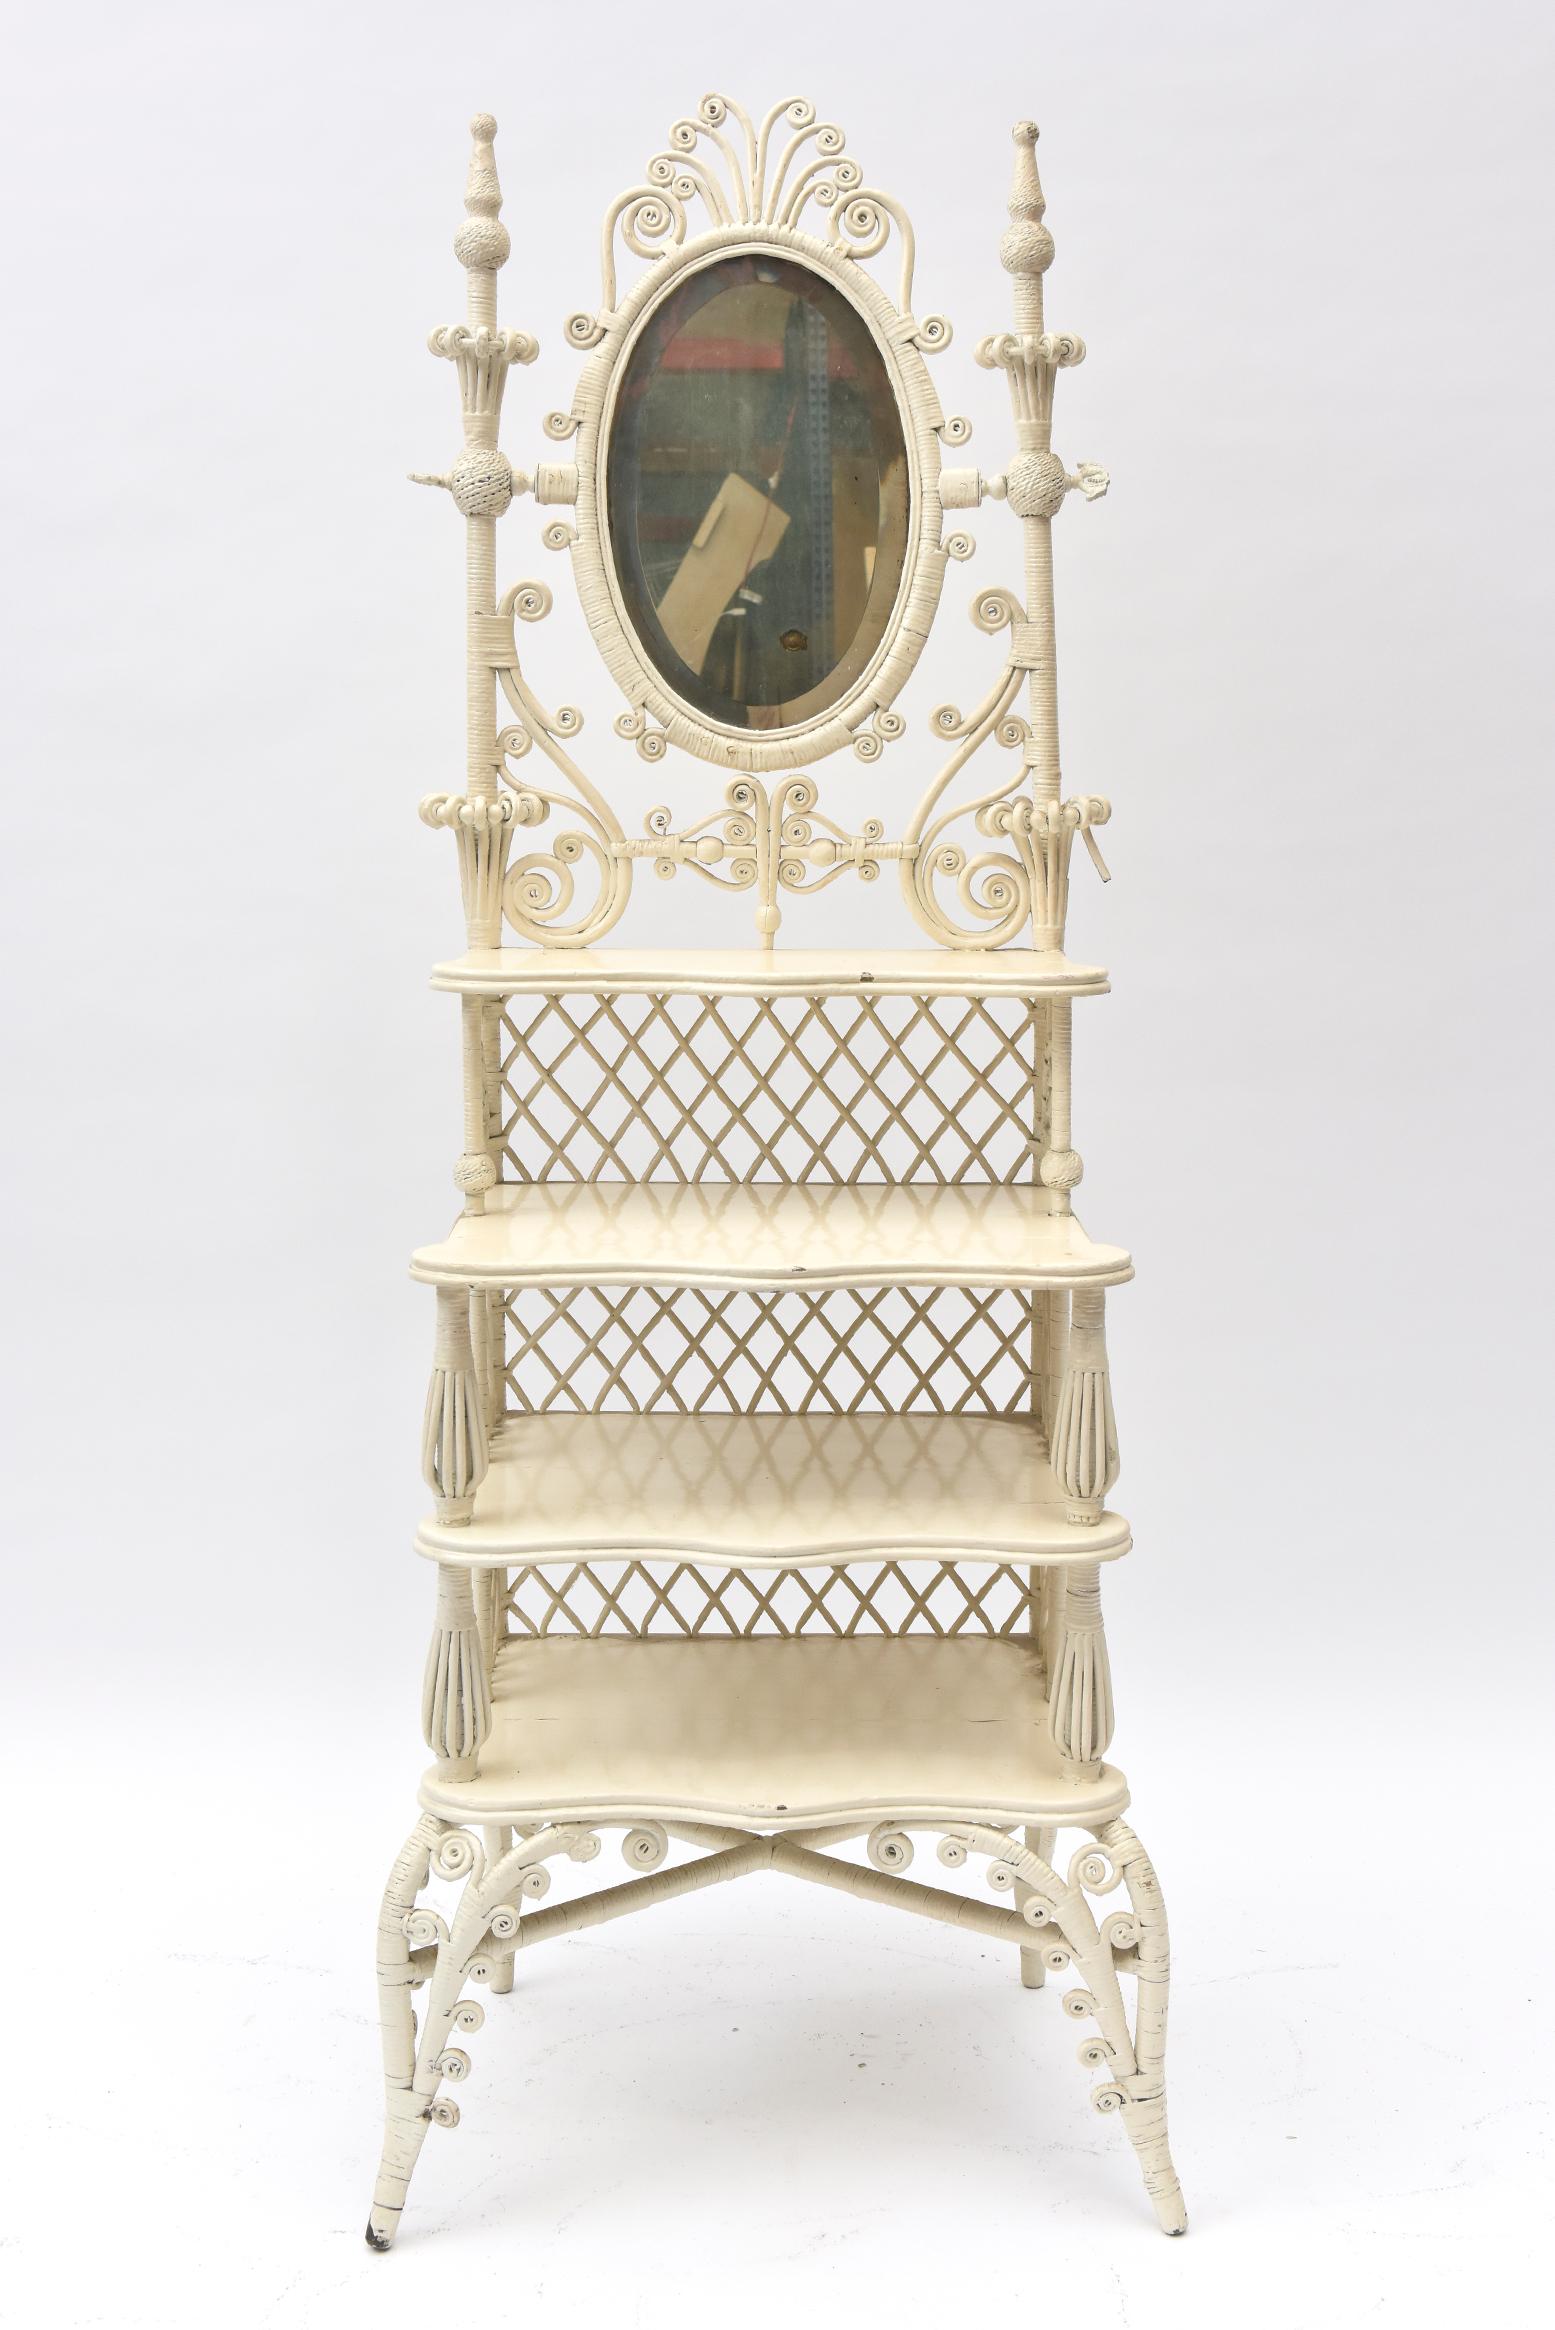 Part of a Senator's wife's wicker collection, this shaving or vanity mirror with display shelves is a very rare piece. Almost every element of Victorian wicker is used here: open lattice work, curlicues, woven wood beads, birdcage spacers on shelf